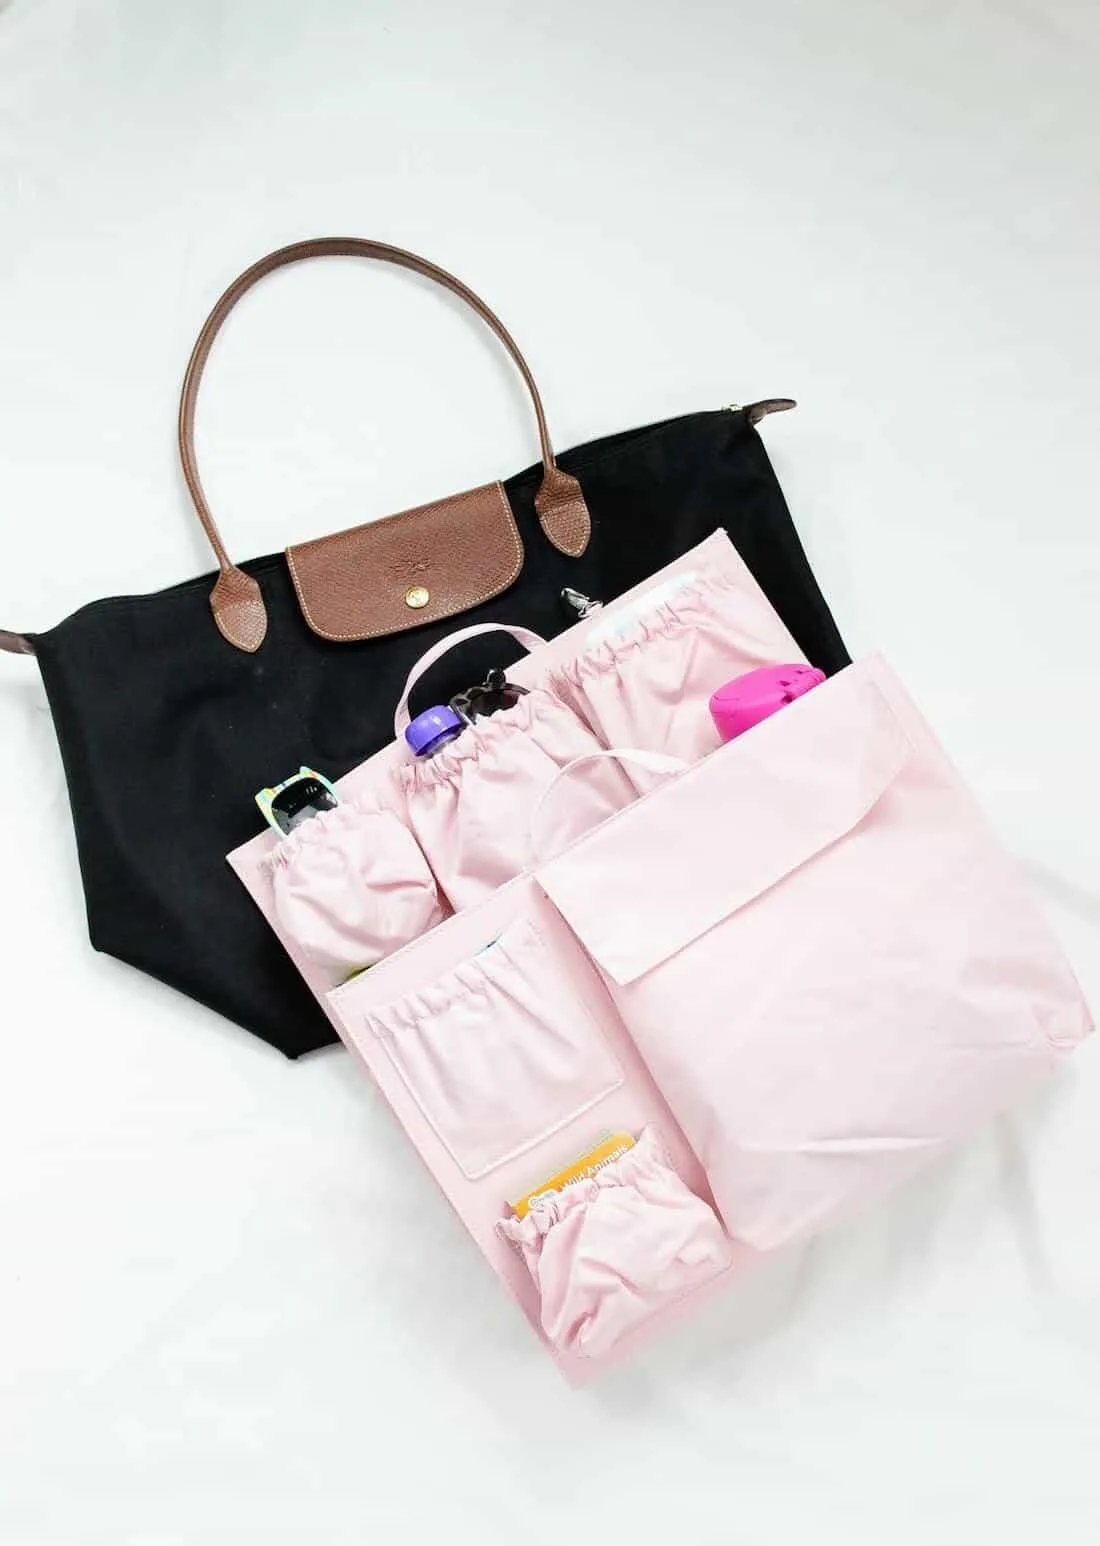 Pink insert for diaper bag for toddlers.